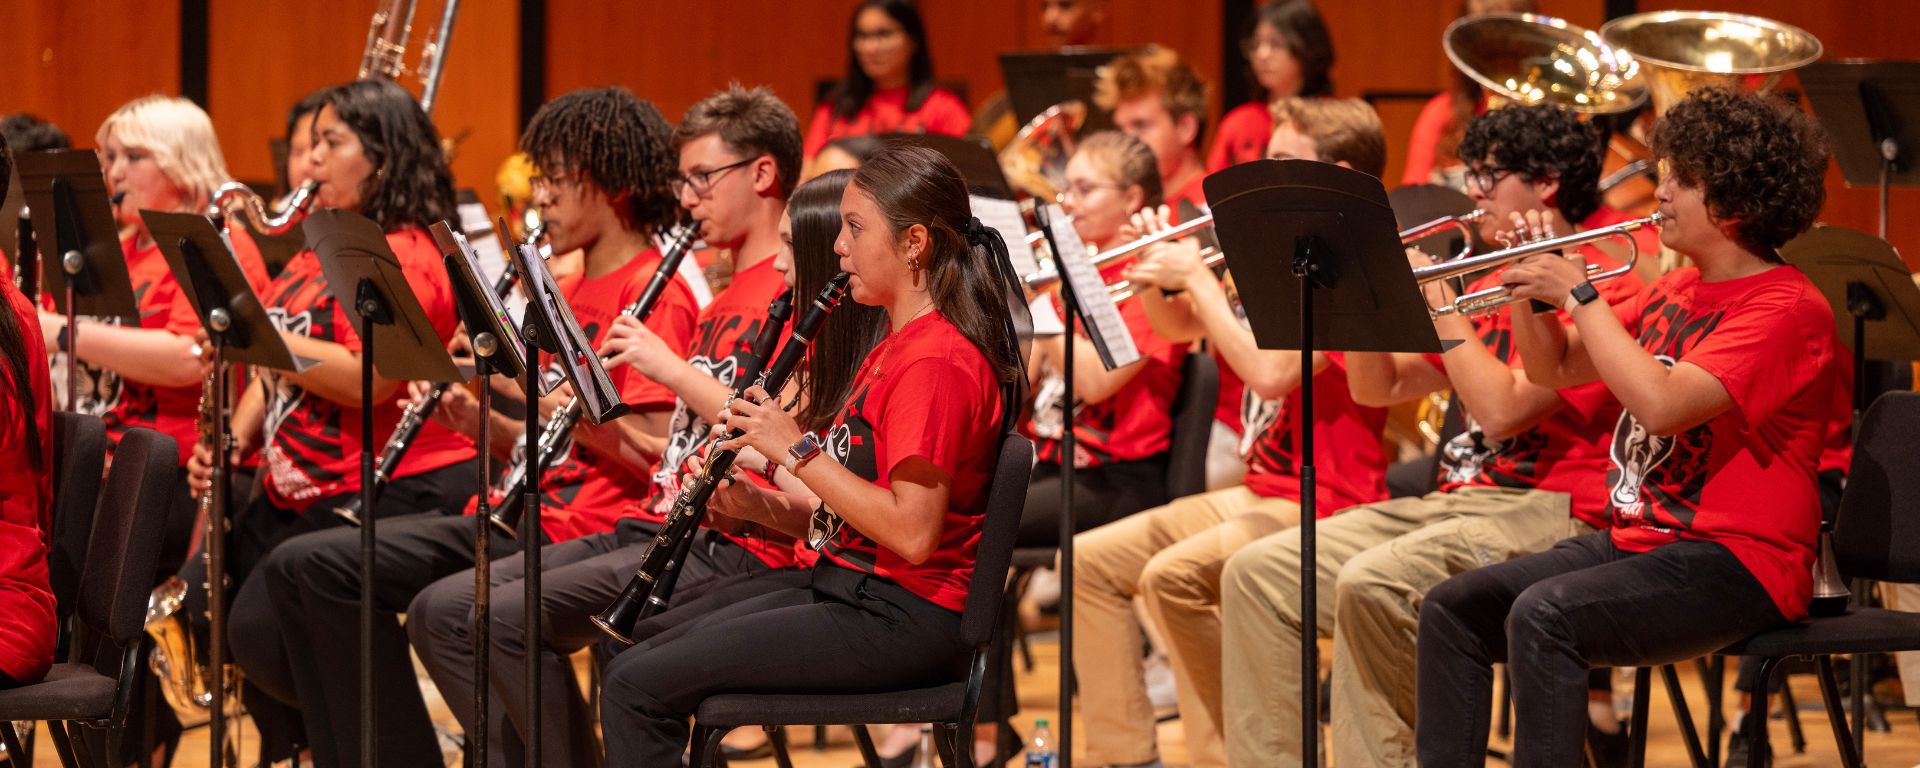 High school woodwind and brass players performing in red shirts